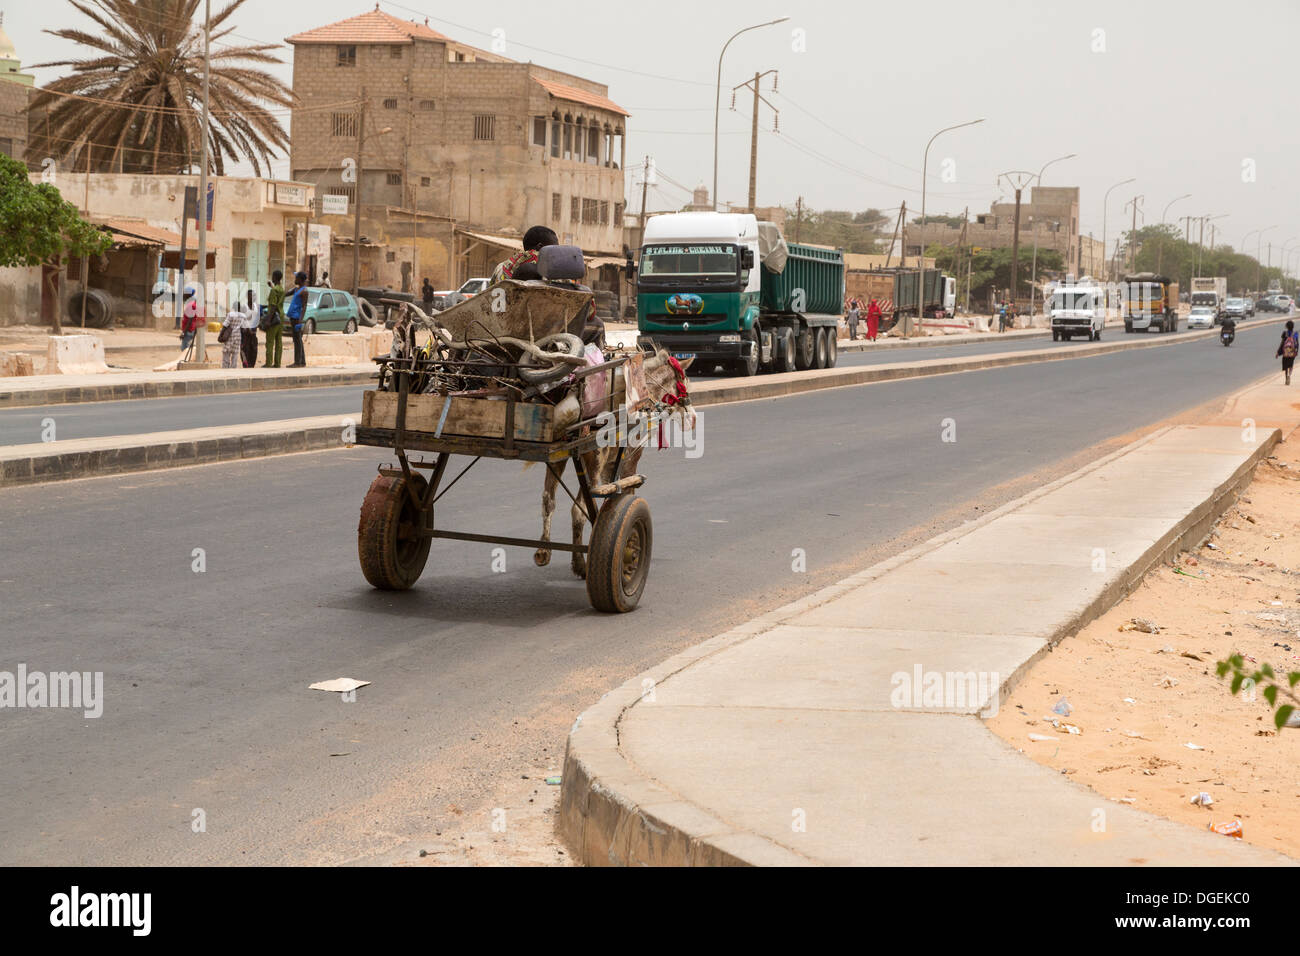 Senegal. A horse-drawn cart shares the divided highway with large trucks on the outskirts of Dakar. Stock Photo